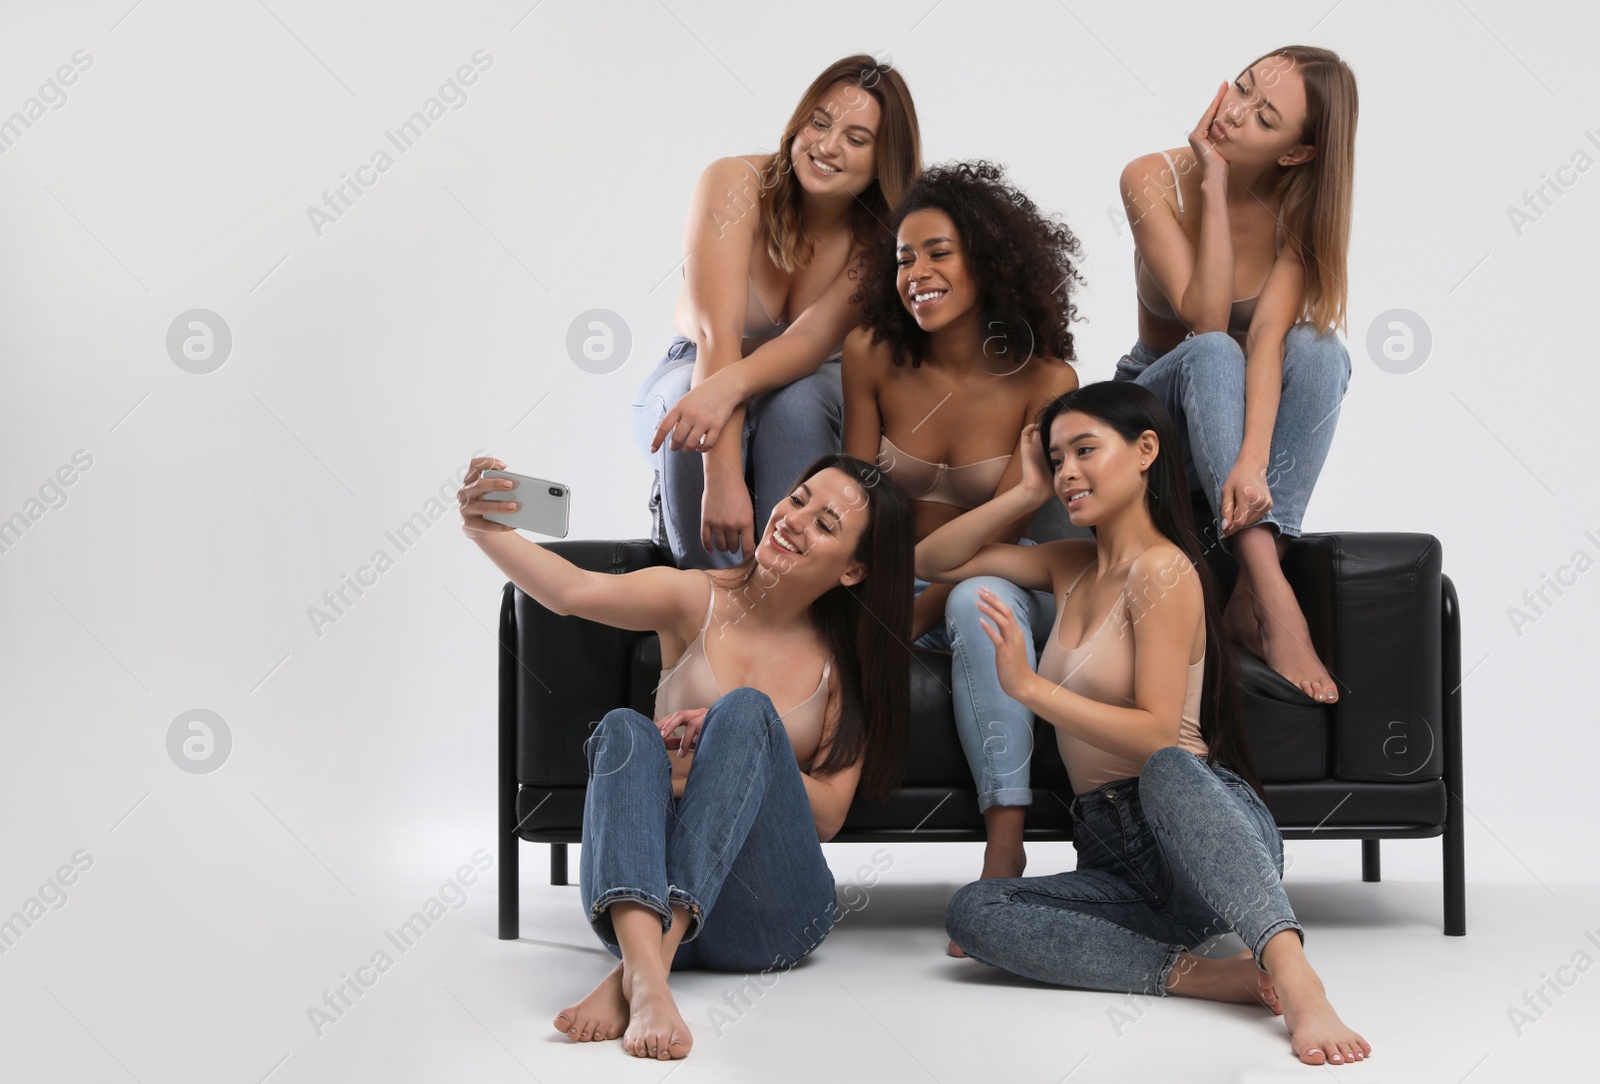 Photo of Group of women with different body types in jeans and underwear taking selfie against light background